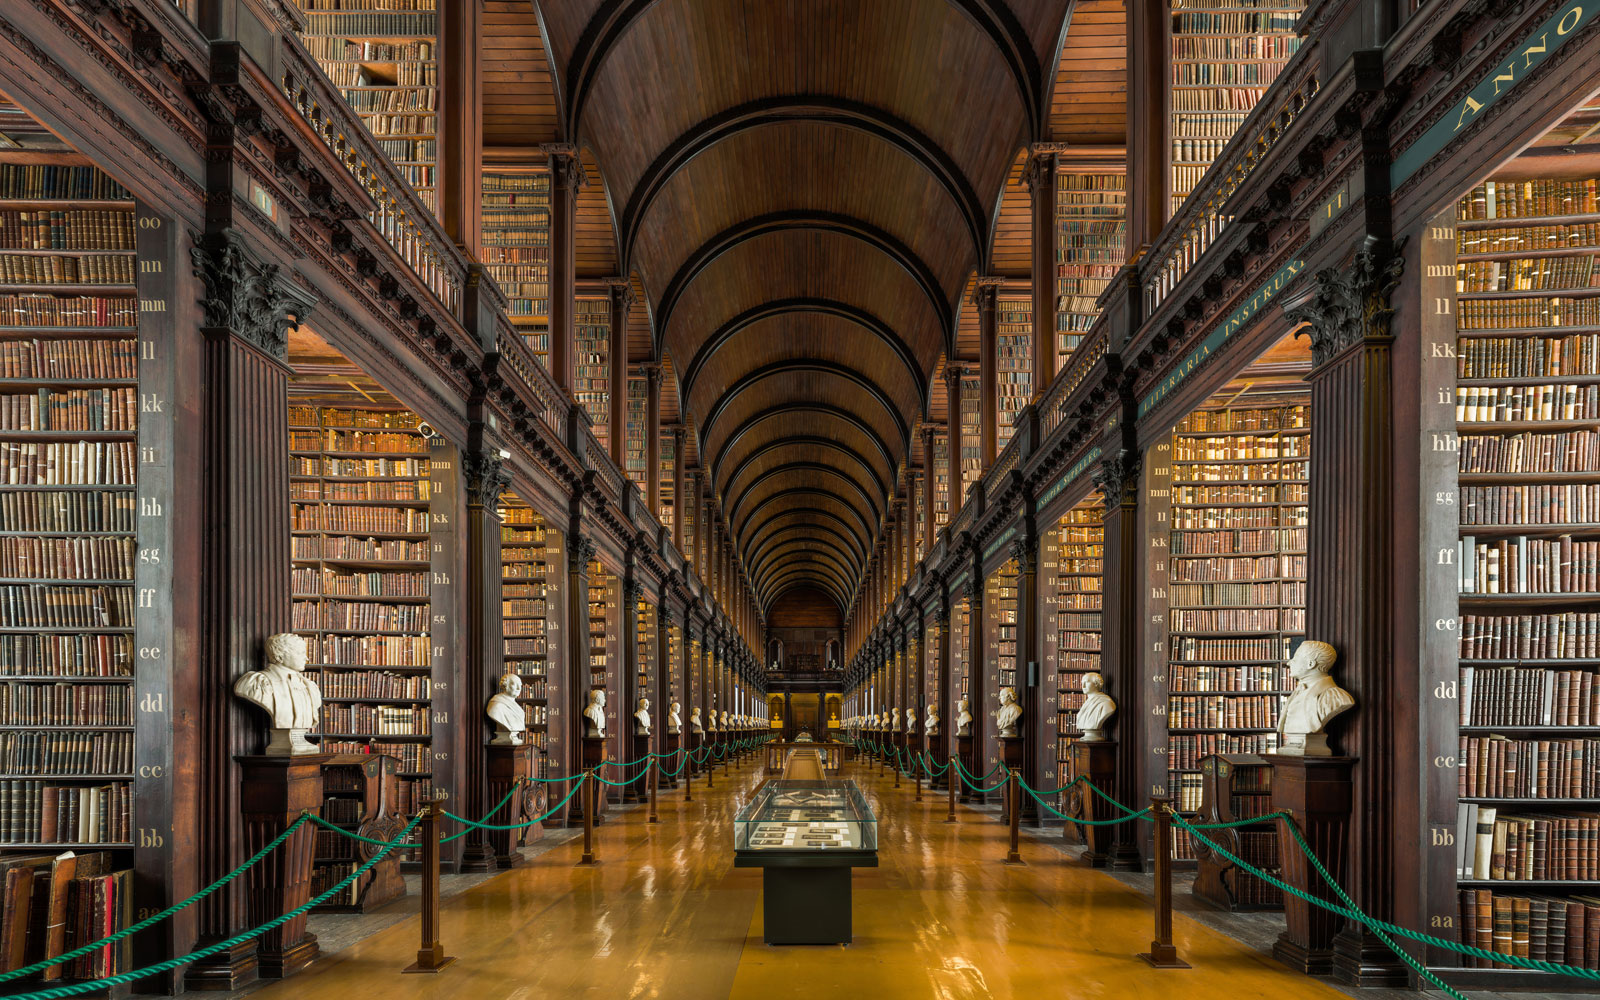 The Long Room of the Old Library at Trinity College Dublin